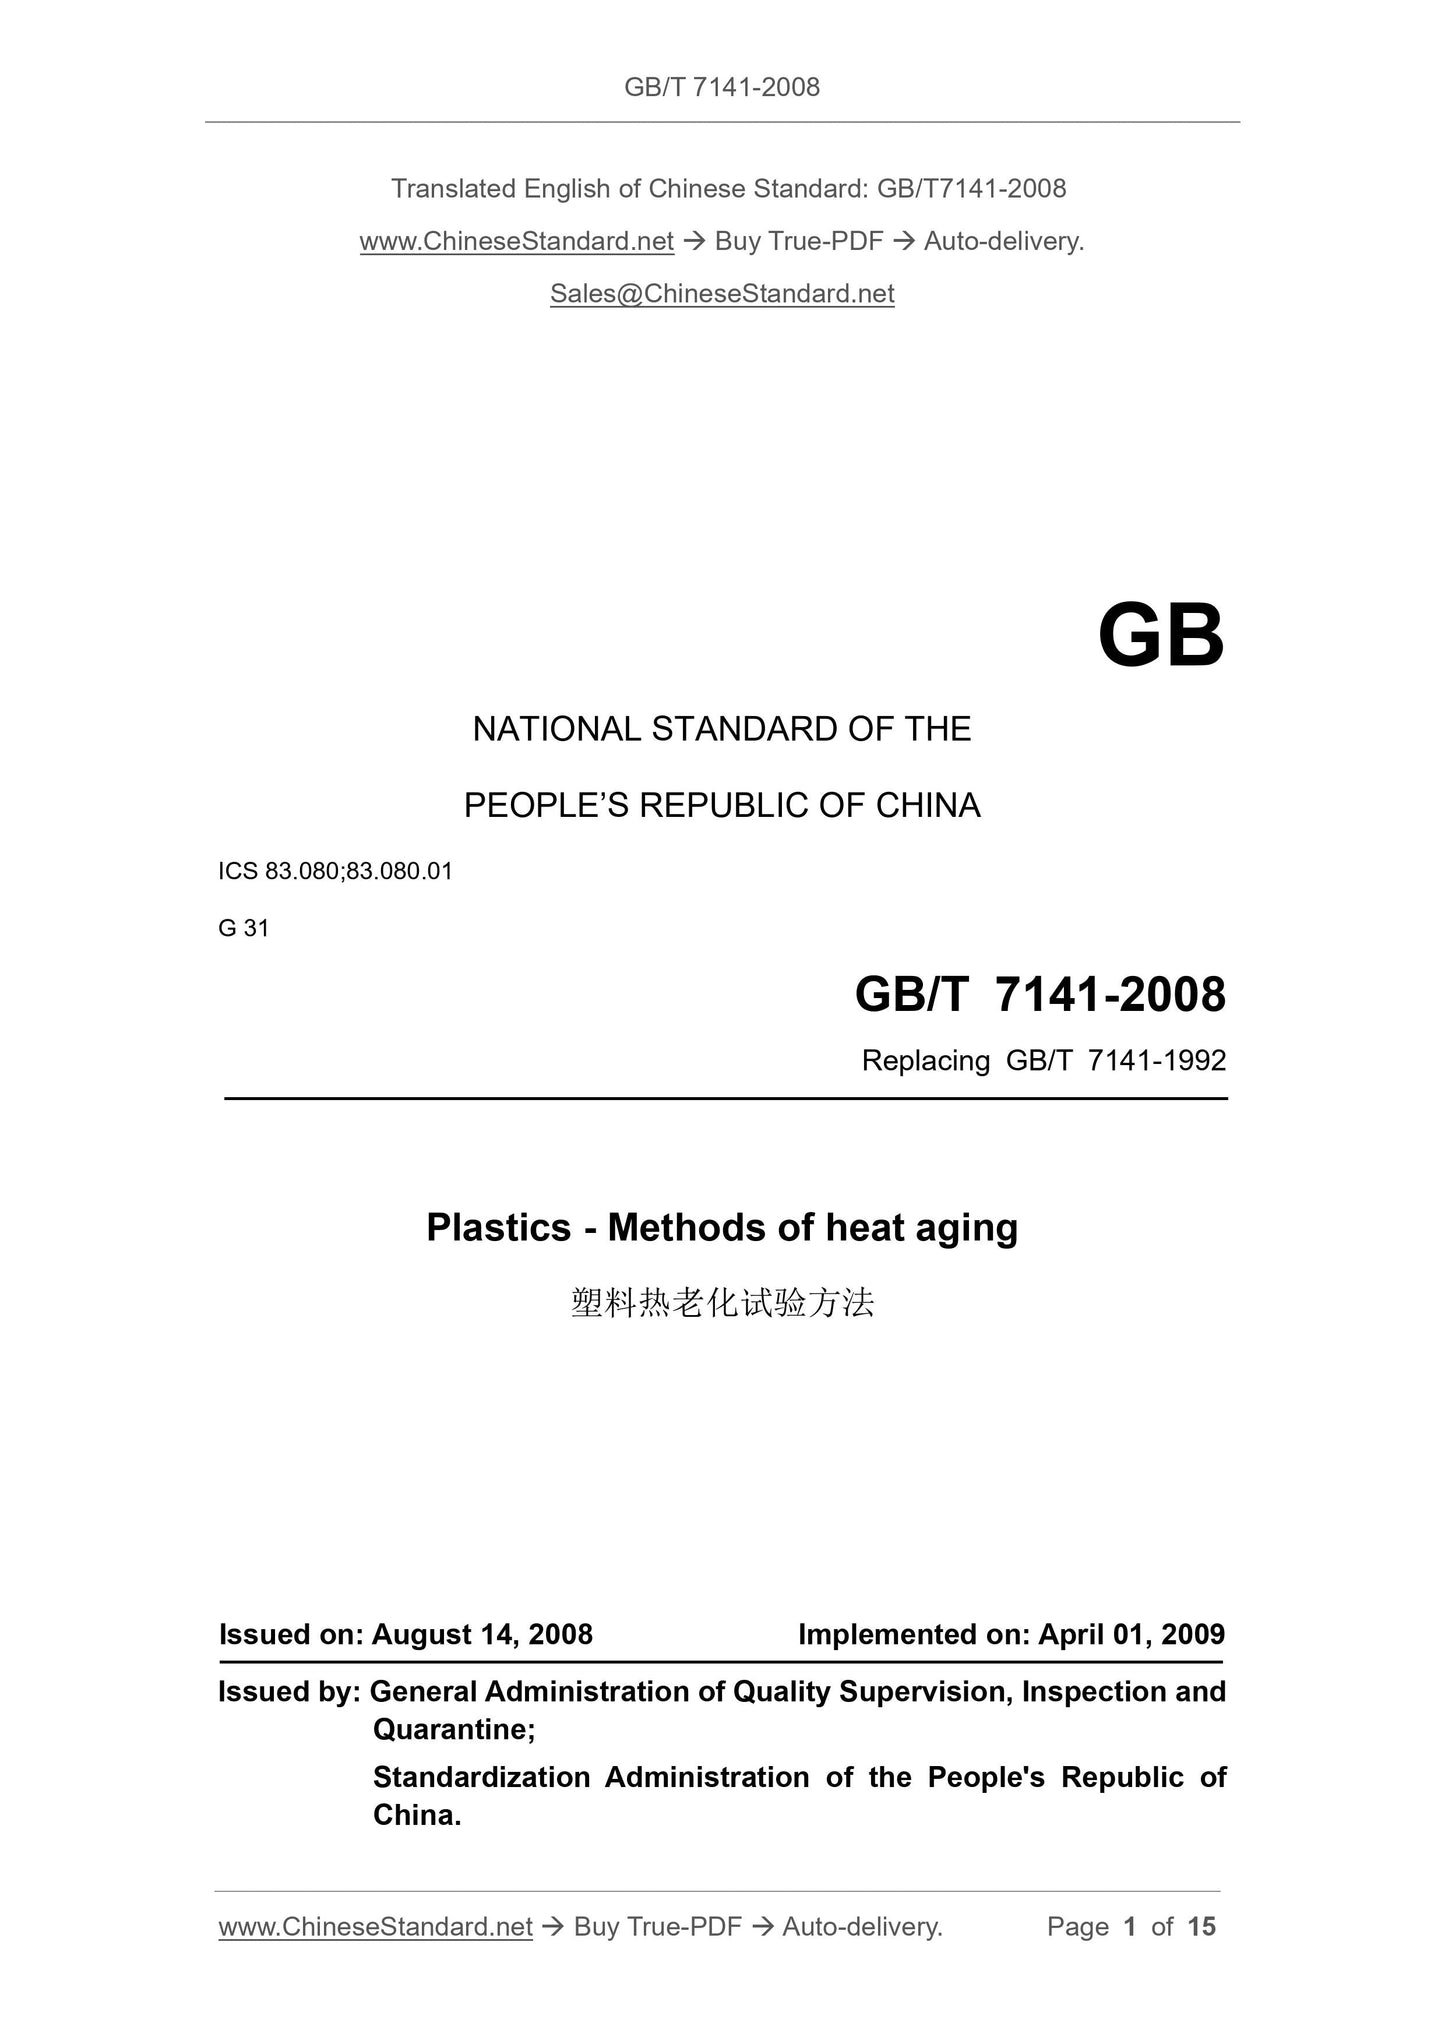 GB/T 7141-2008 Page 1